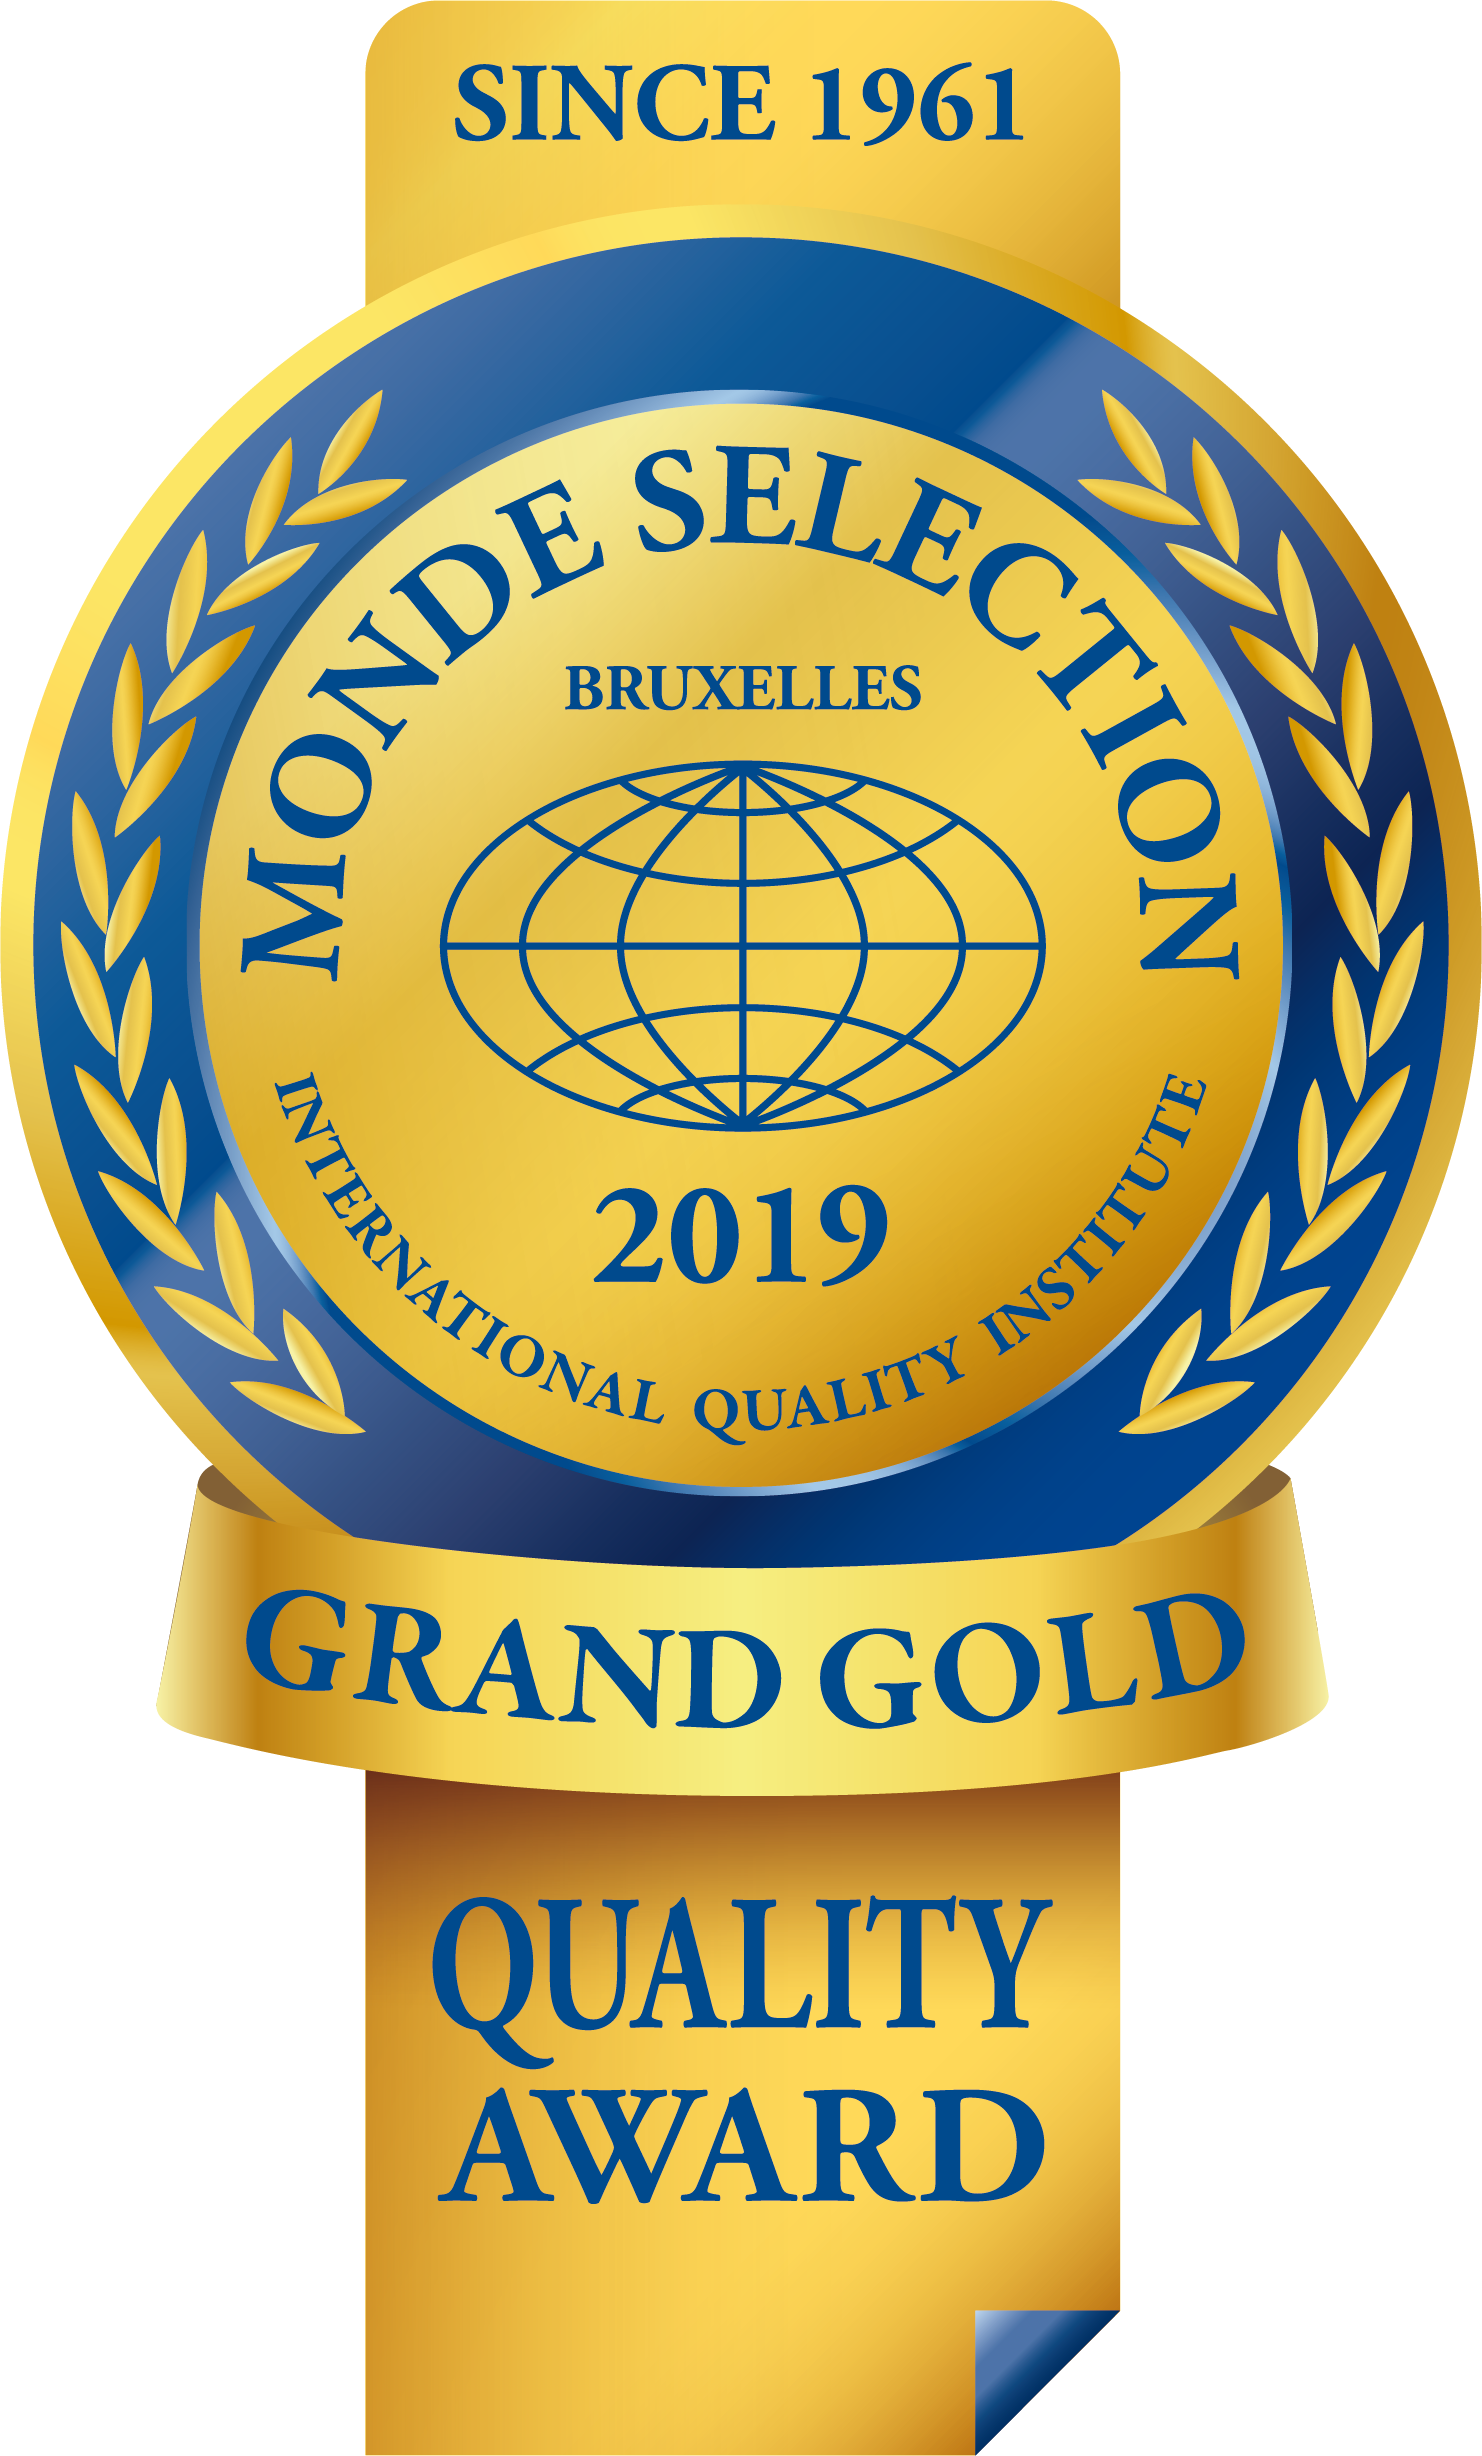 monde_selection_grand_gold_quality_award_2019.png